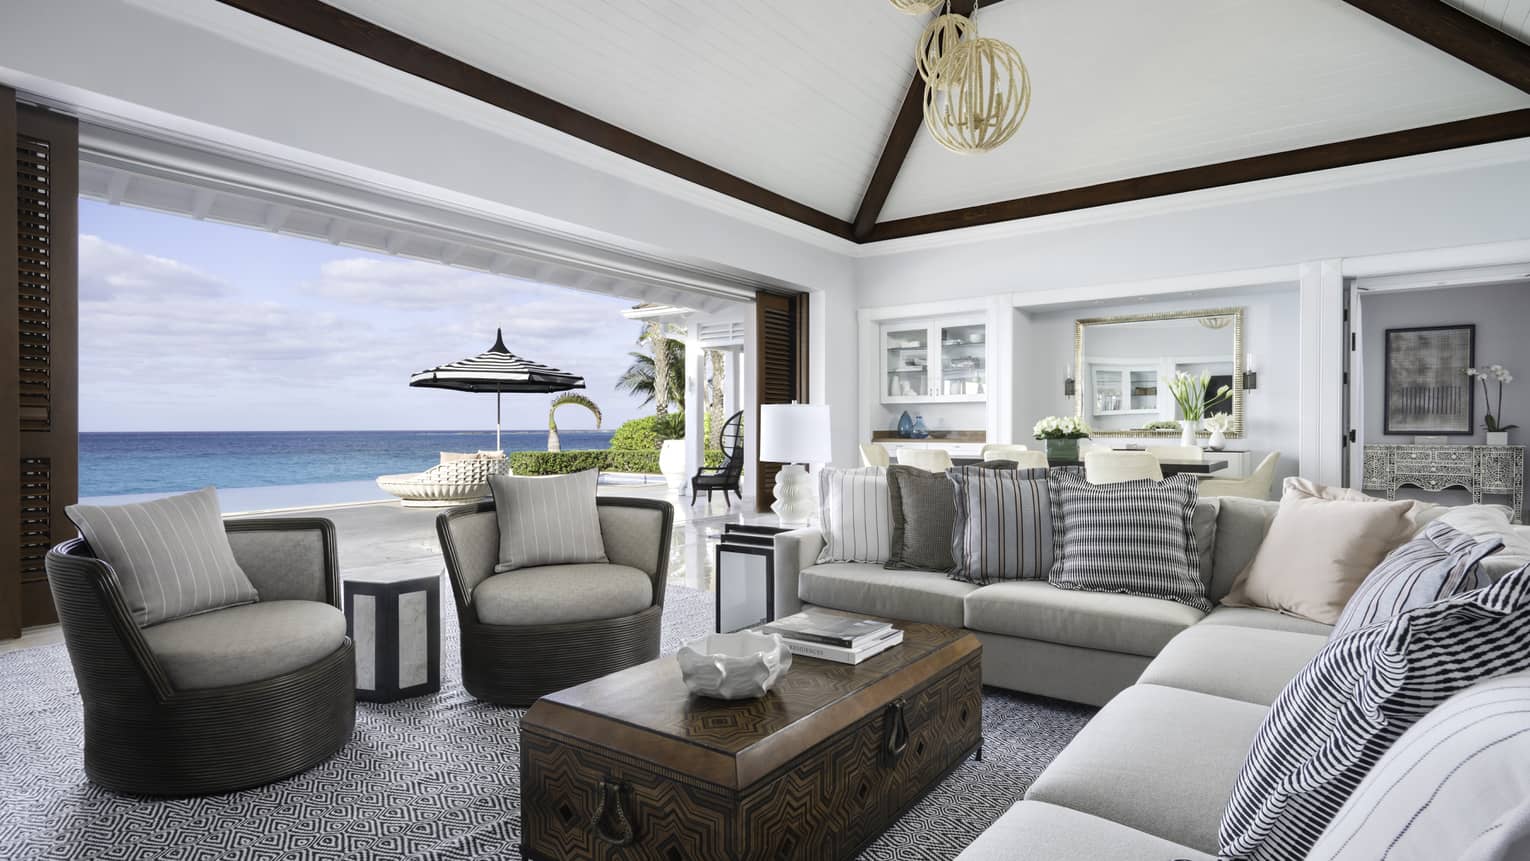 Beachfront Villa Residence large living room with modular sofa, armchairs by open wall to patio overlooking ocean  